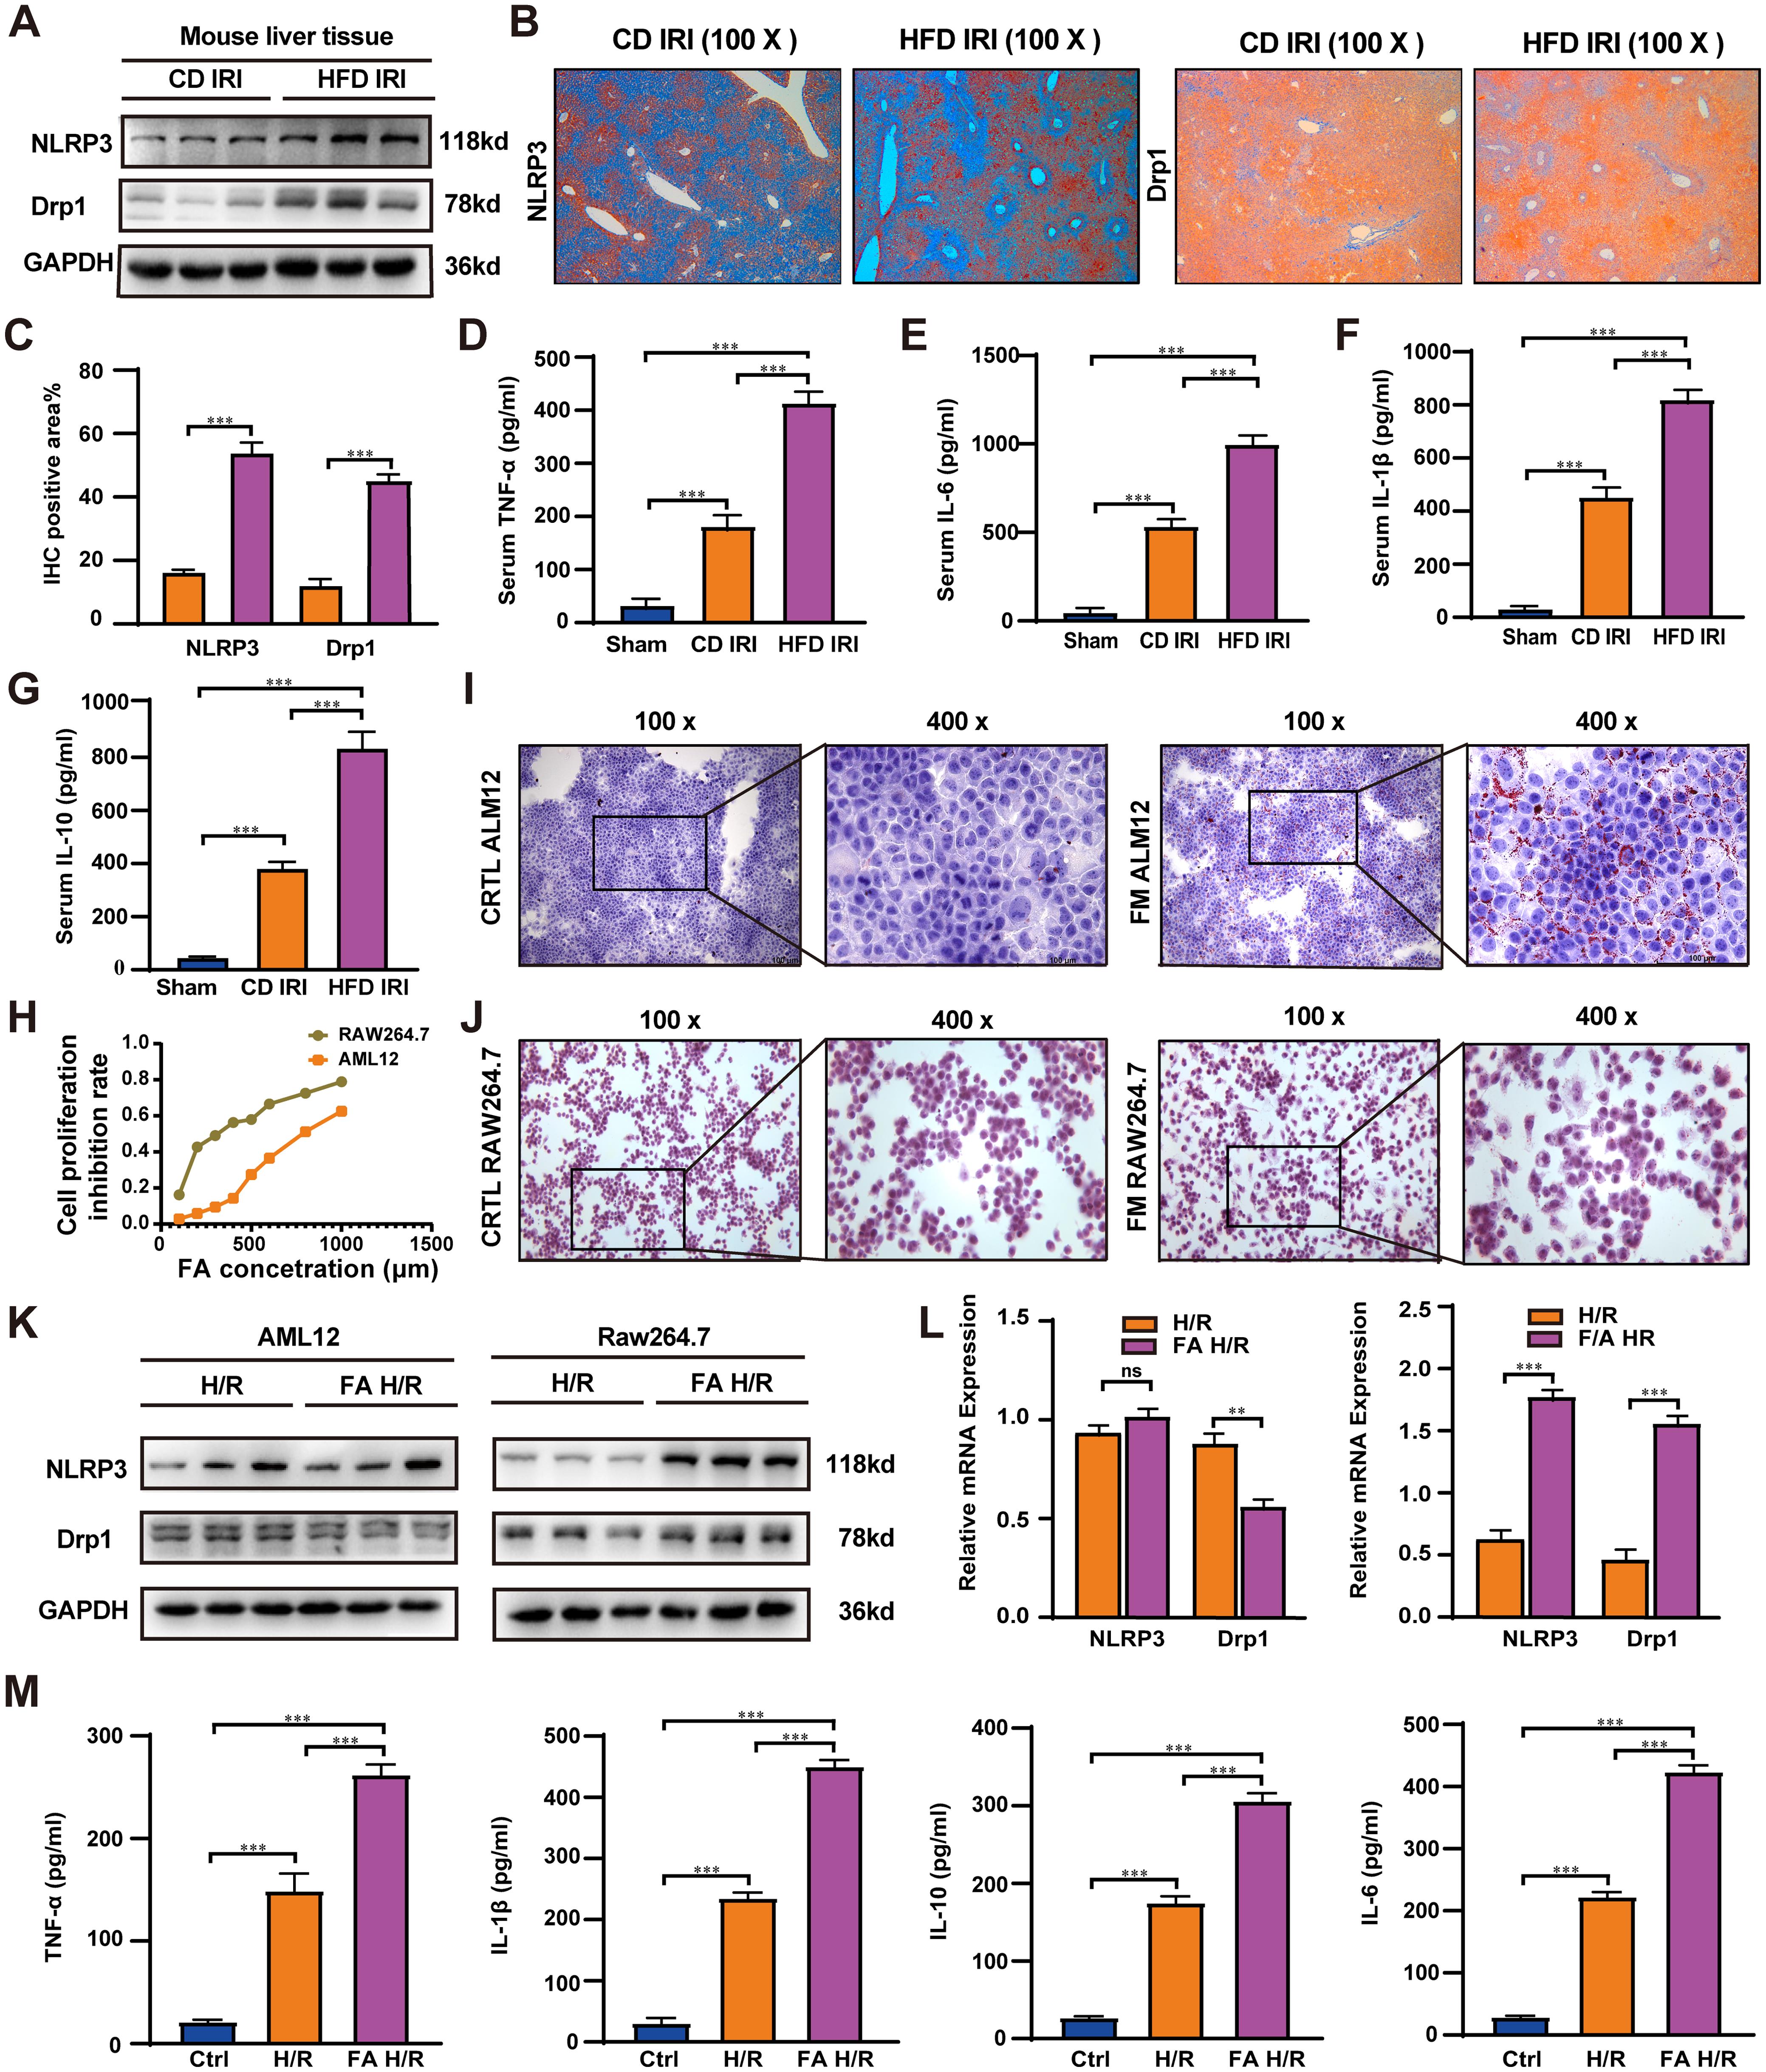 Kupffer cells aggravate ischemia-reperfusion injury in hepatic steatosis by upregulating Drp1 and NLRP3.